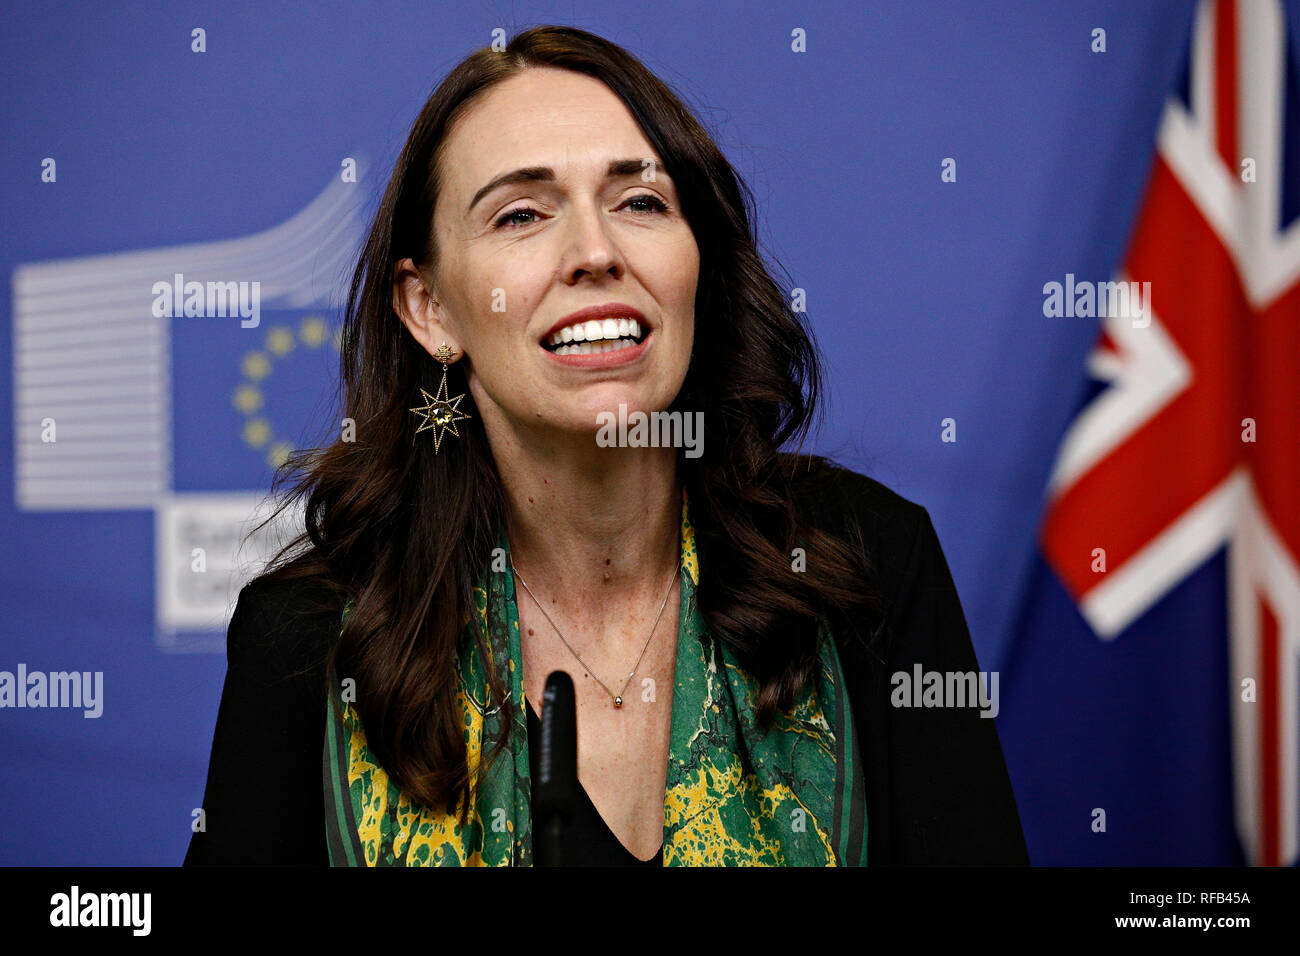 Brussels, Belgium. 25th January 2019.New Zealand's Prime Minister Jacinda Ardern and European Commission President Jean-Claude Juncker hold a news conference. Alexandros Michailidis/Alamy Live News Stock Photo